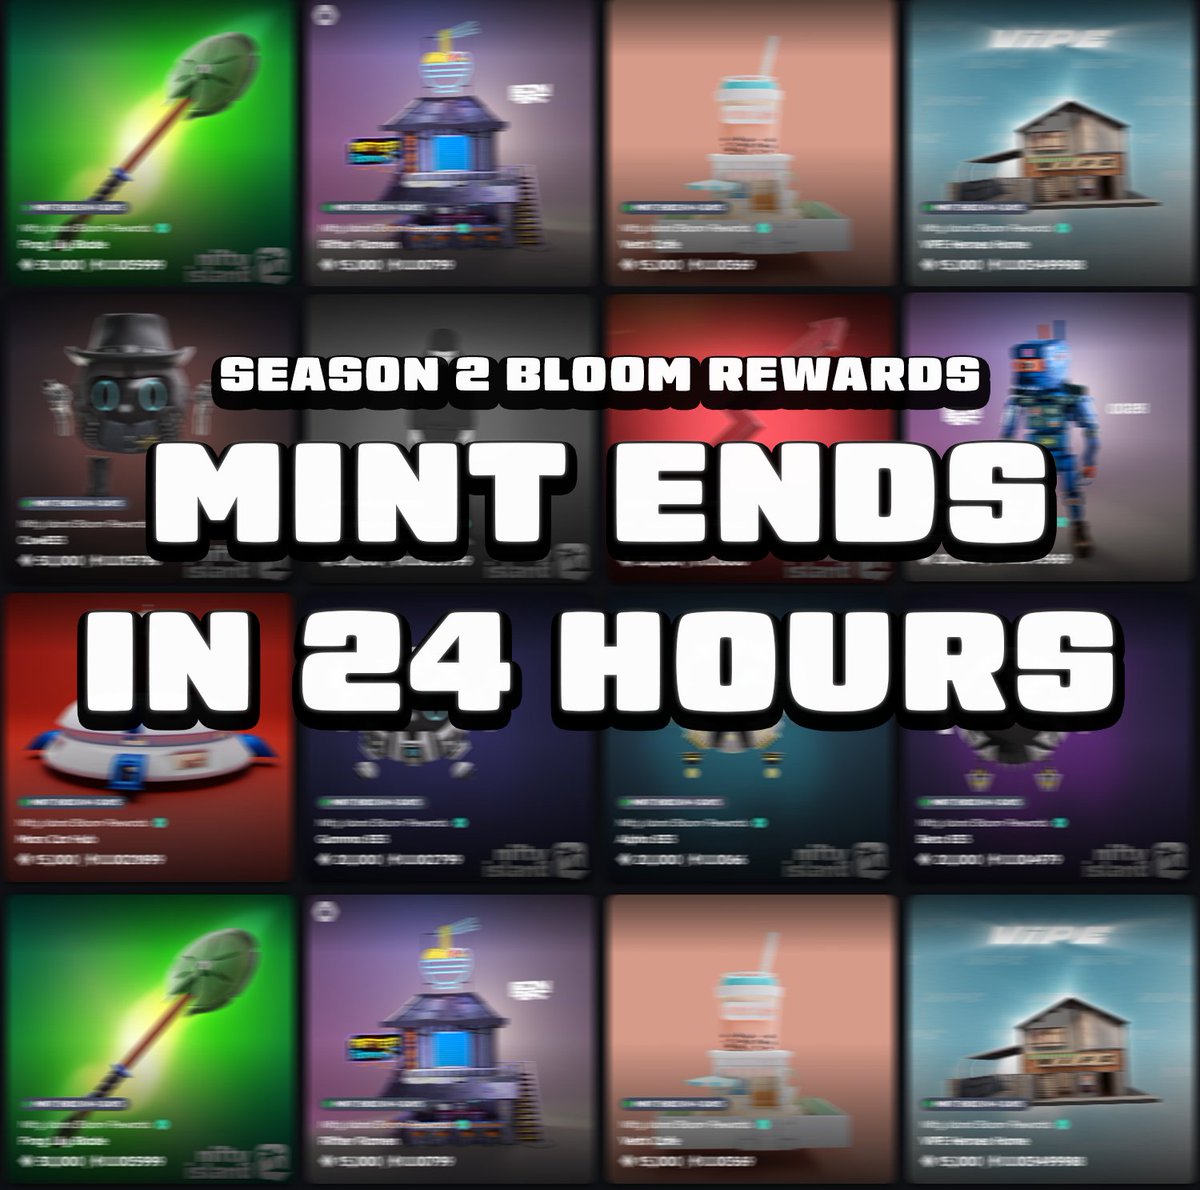 Time's running out! ⏰ Only 24 hours left to mint your @Nifty_Island Season 2 Bloom rewards before they're gone for good! 🏝️ Share your favorite Season 2 Bloom reward, i'll start with mine. ⬇️